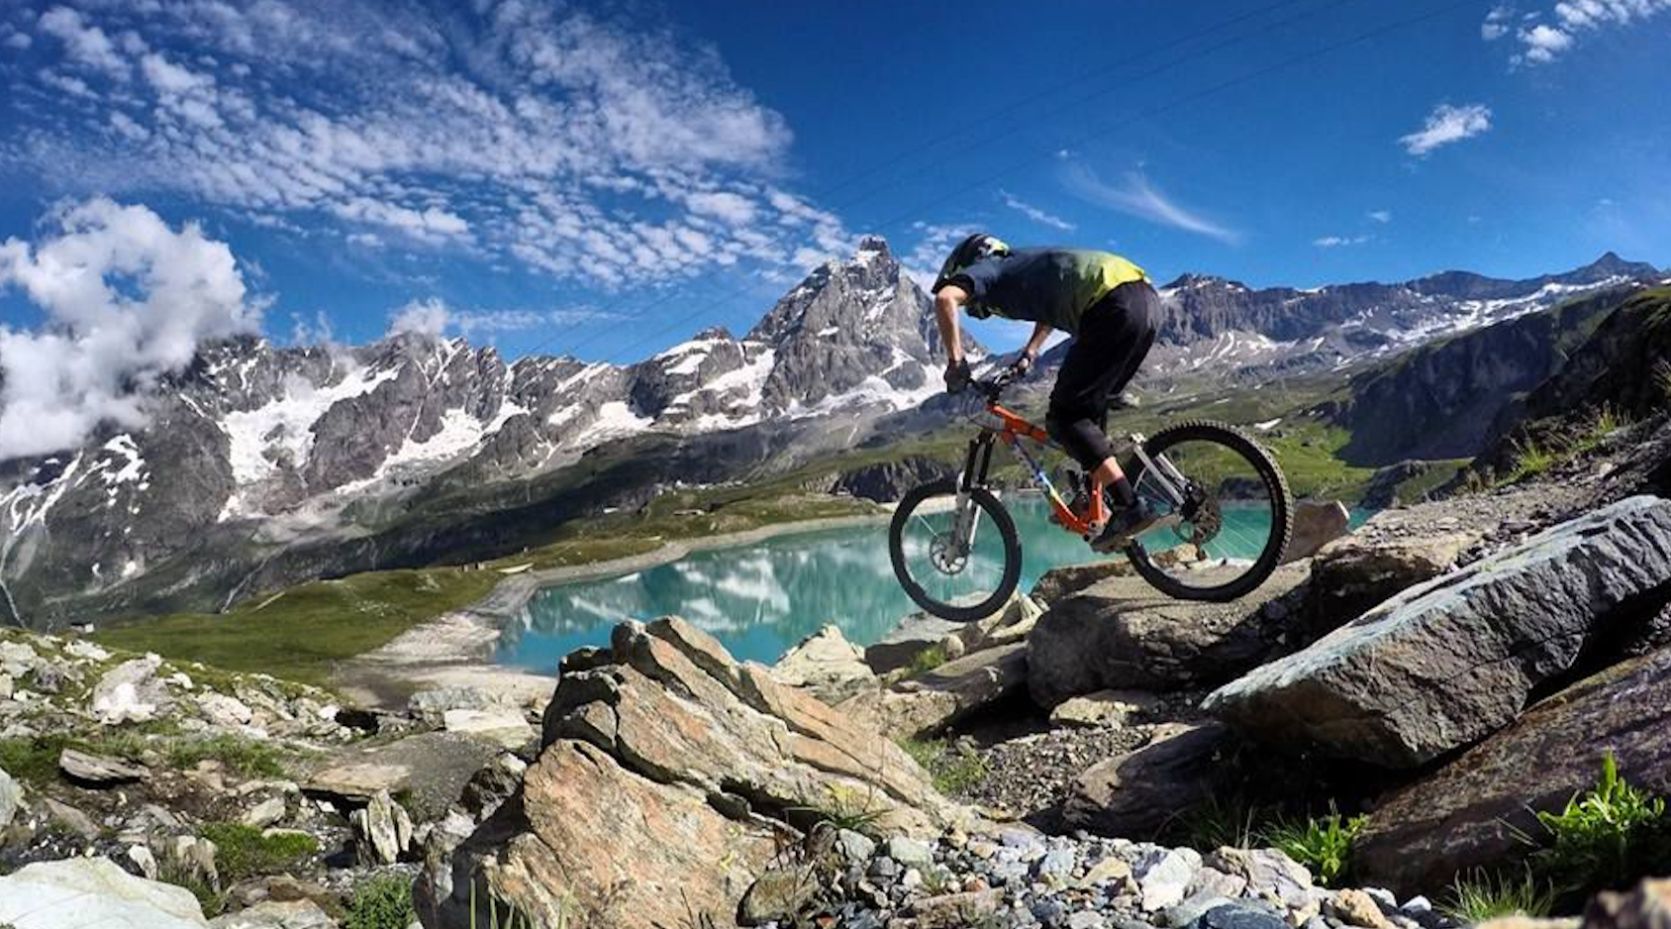 A cyclist downhill mountain biking in Cervinia, with the famous Matterhorn in the background.